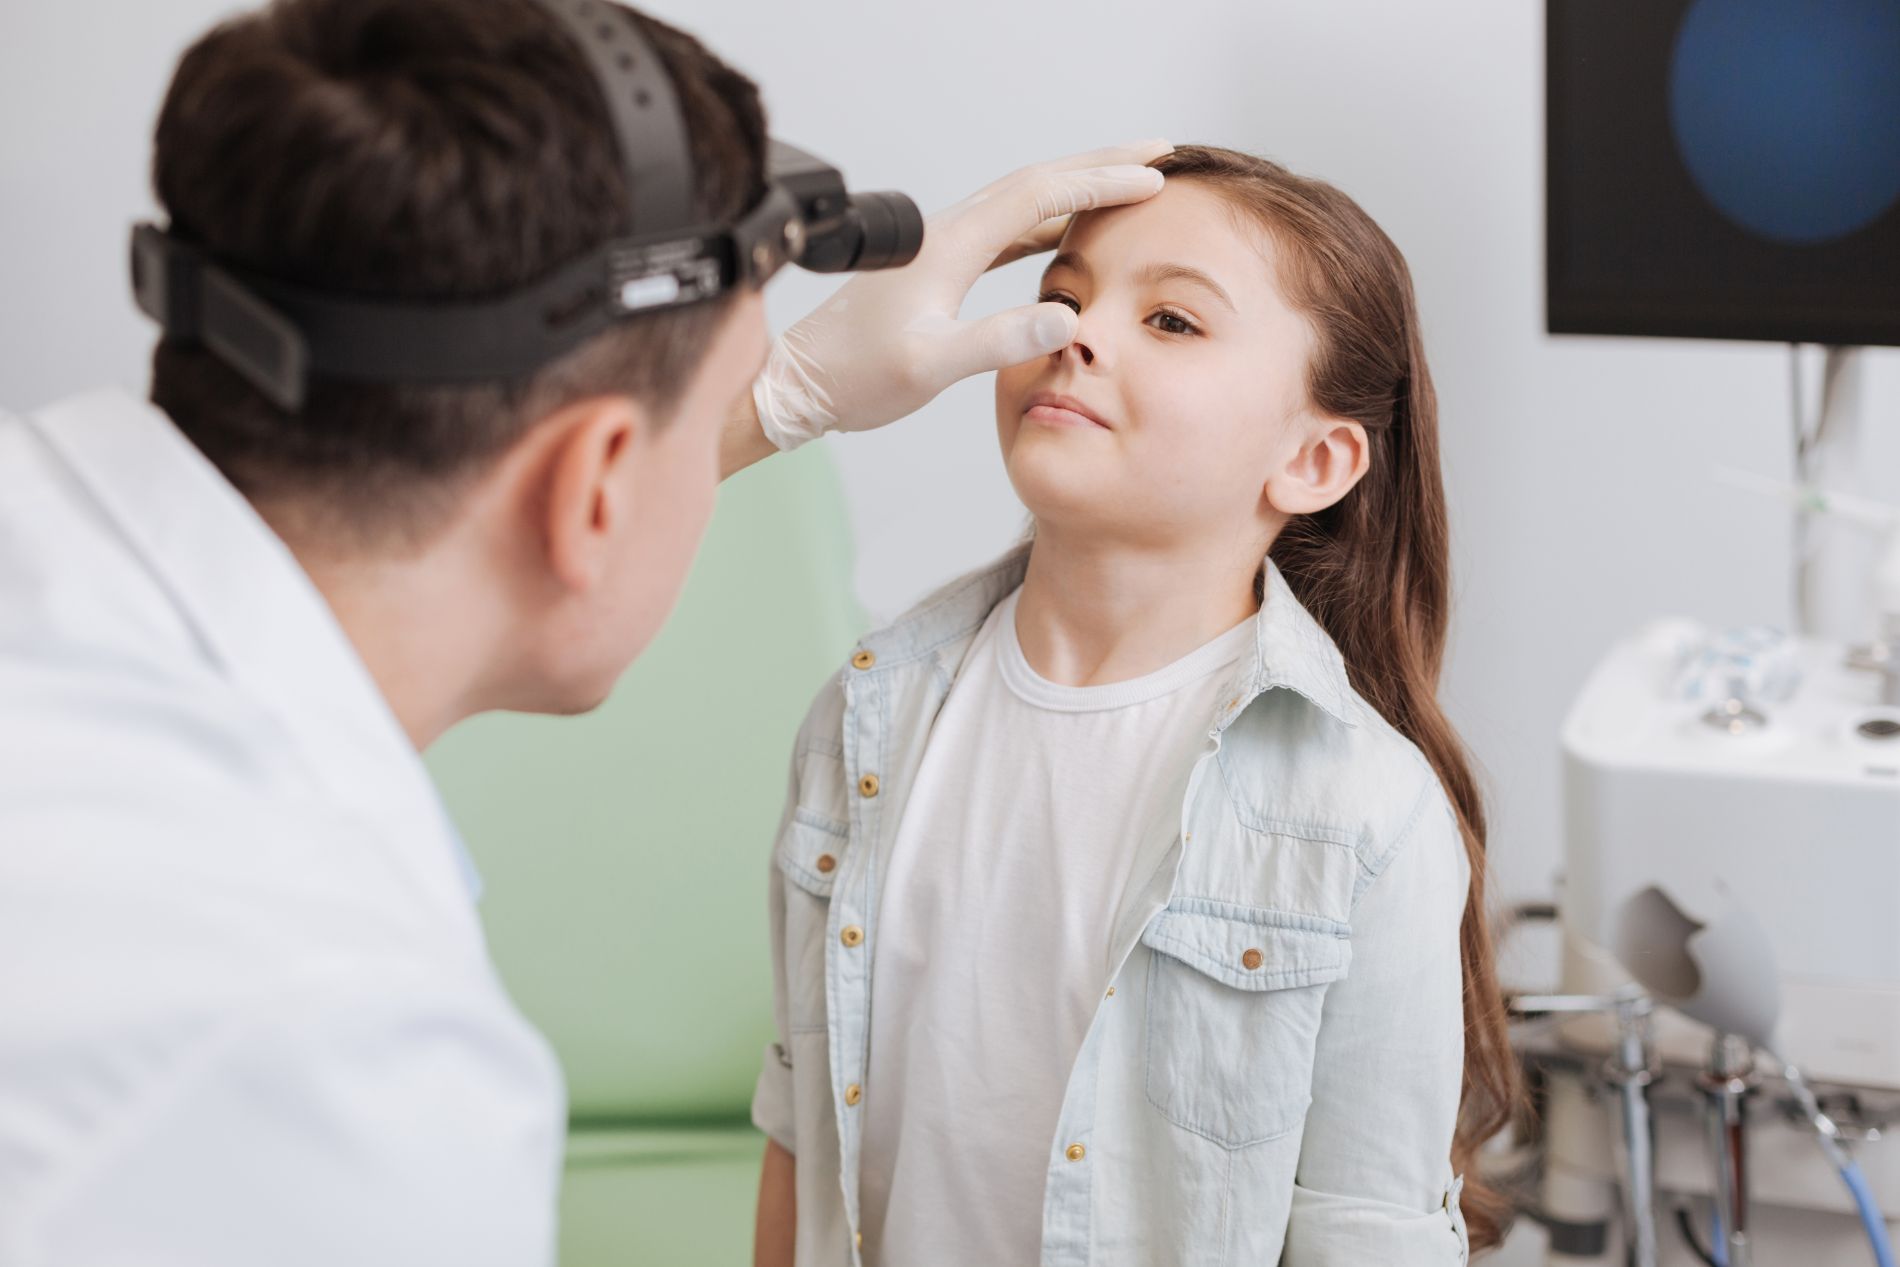 Doctor looking into a child's nose